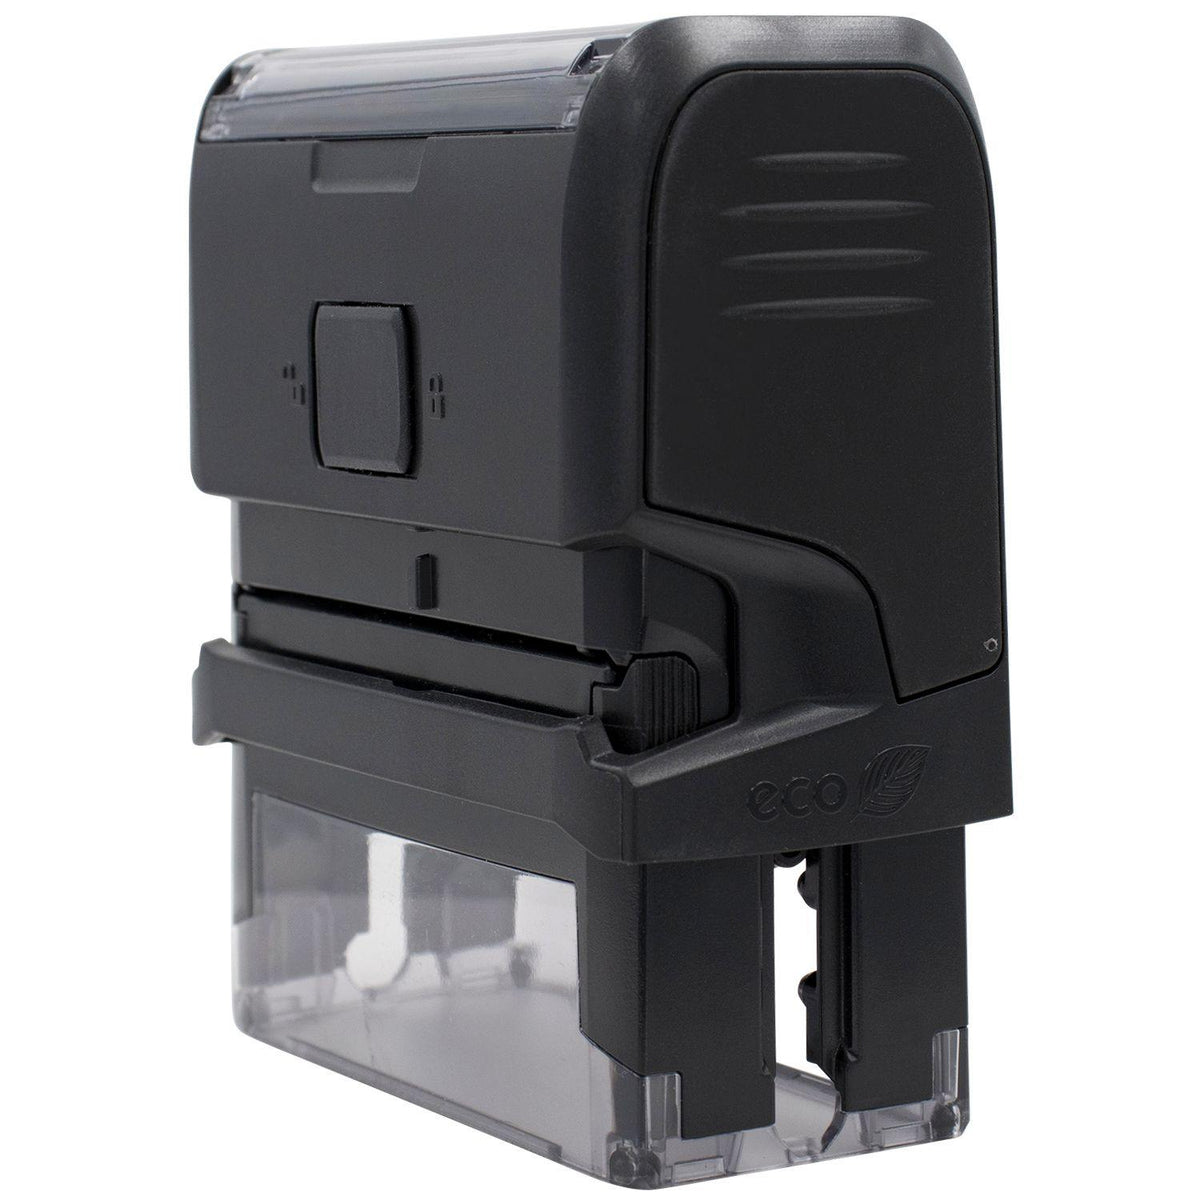 Large Self-Inking Narrow Font Confidential Stamp - Engineer Seal Stamps - Brand_Trodat, Impression Size_Large, Stamp Type_Self-Inking Stamp, Type of Use_Finance, Type of Use_Legal, Type of Use_Office